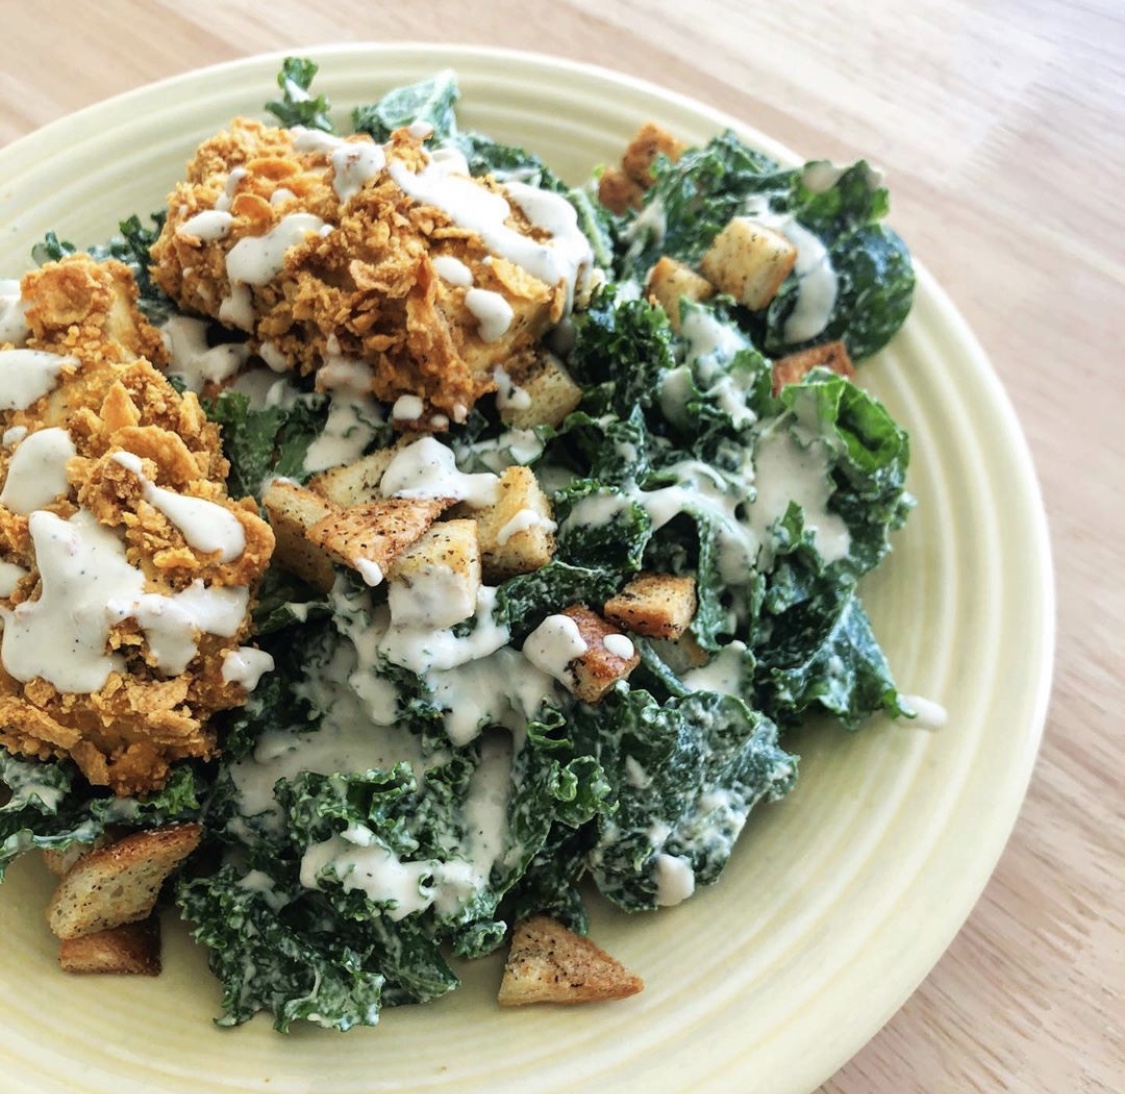 Kale Caesar Salad with Homemade Croutons